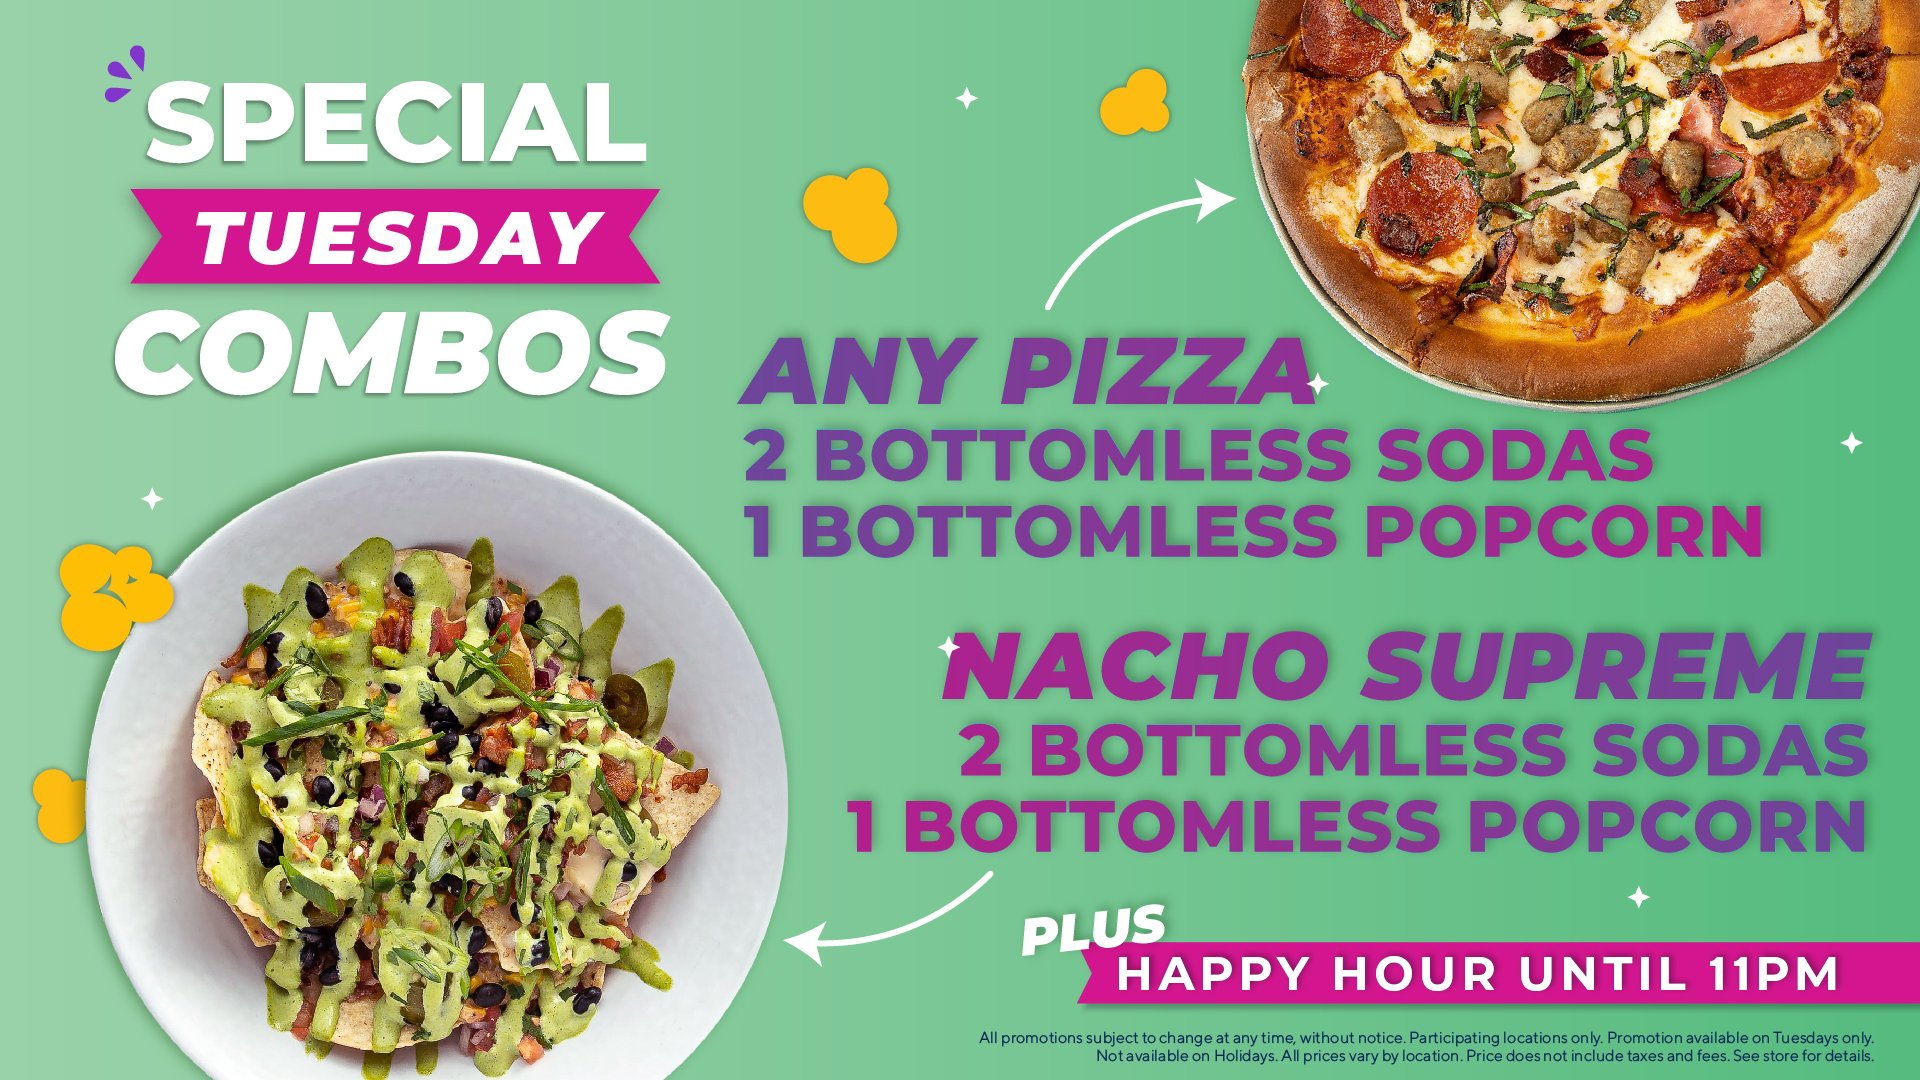 Cinepolis Deals on Pizza and Nachos